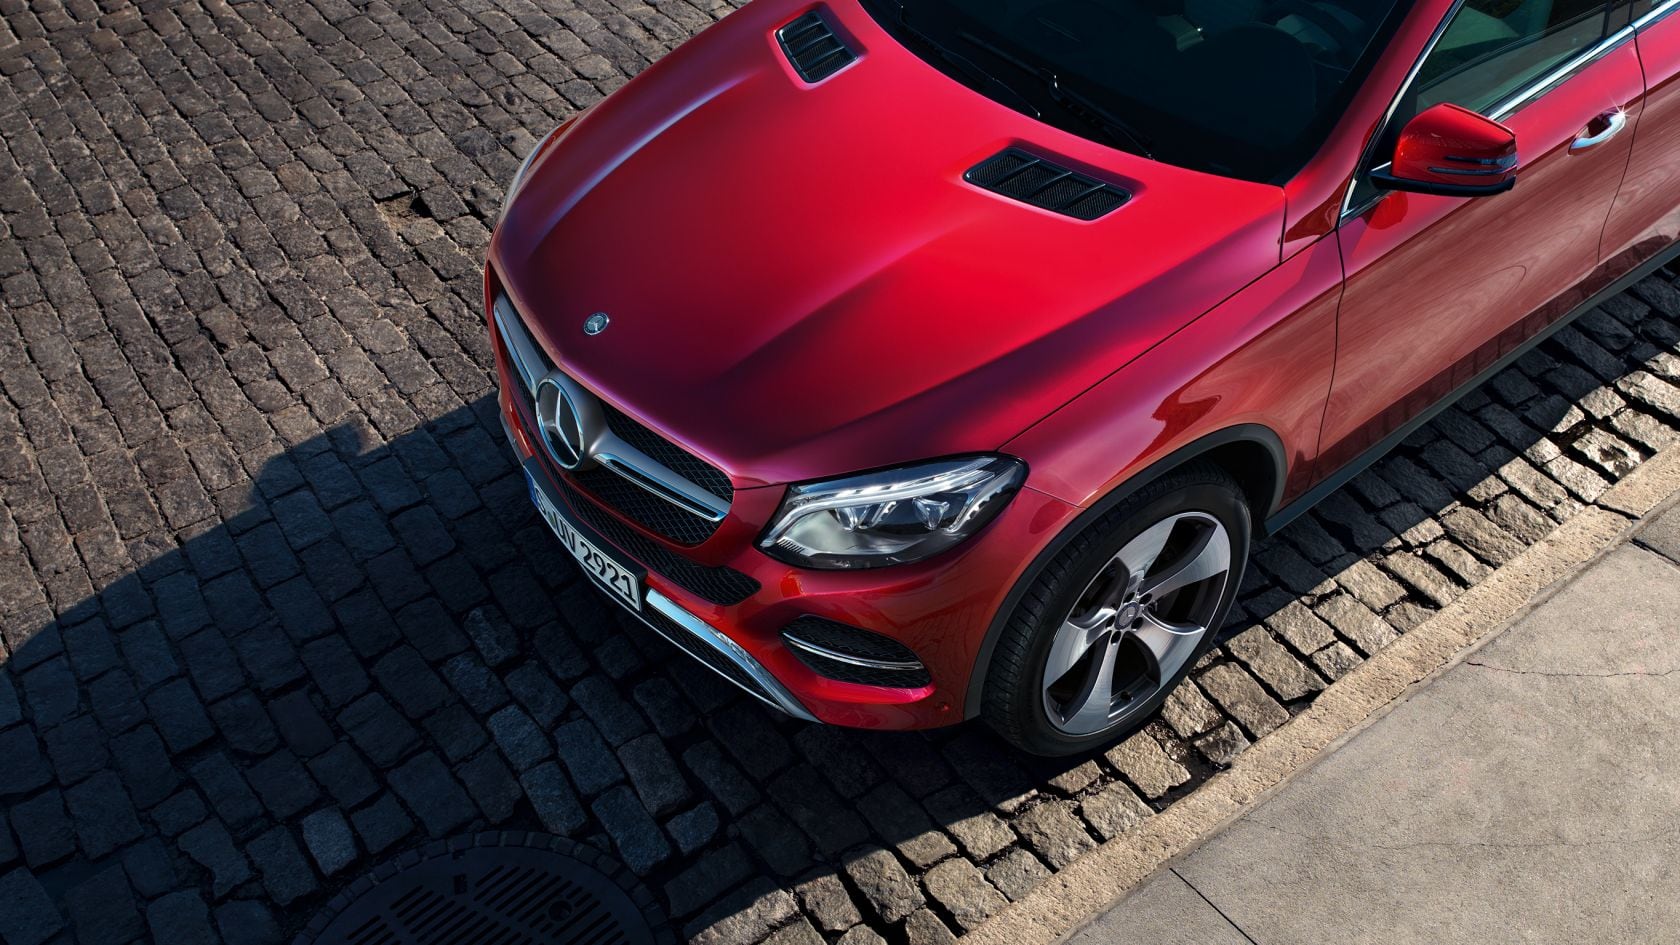 Mercedes-Benz GLE coupe